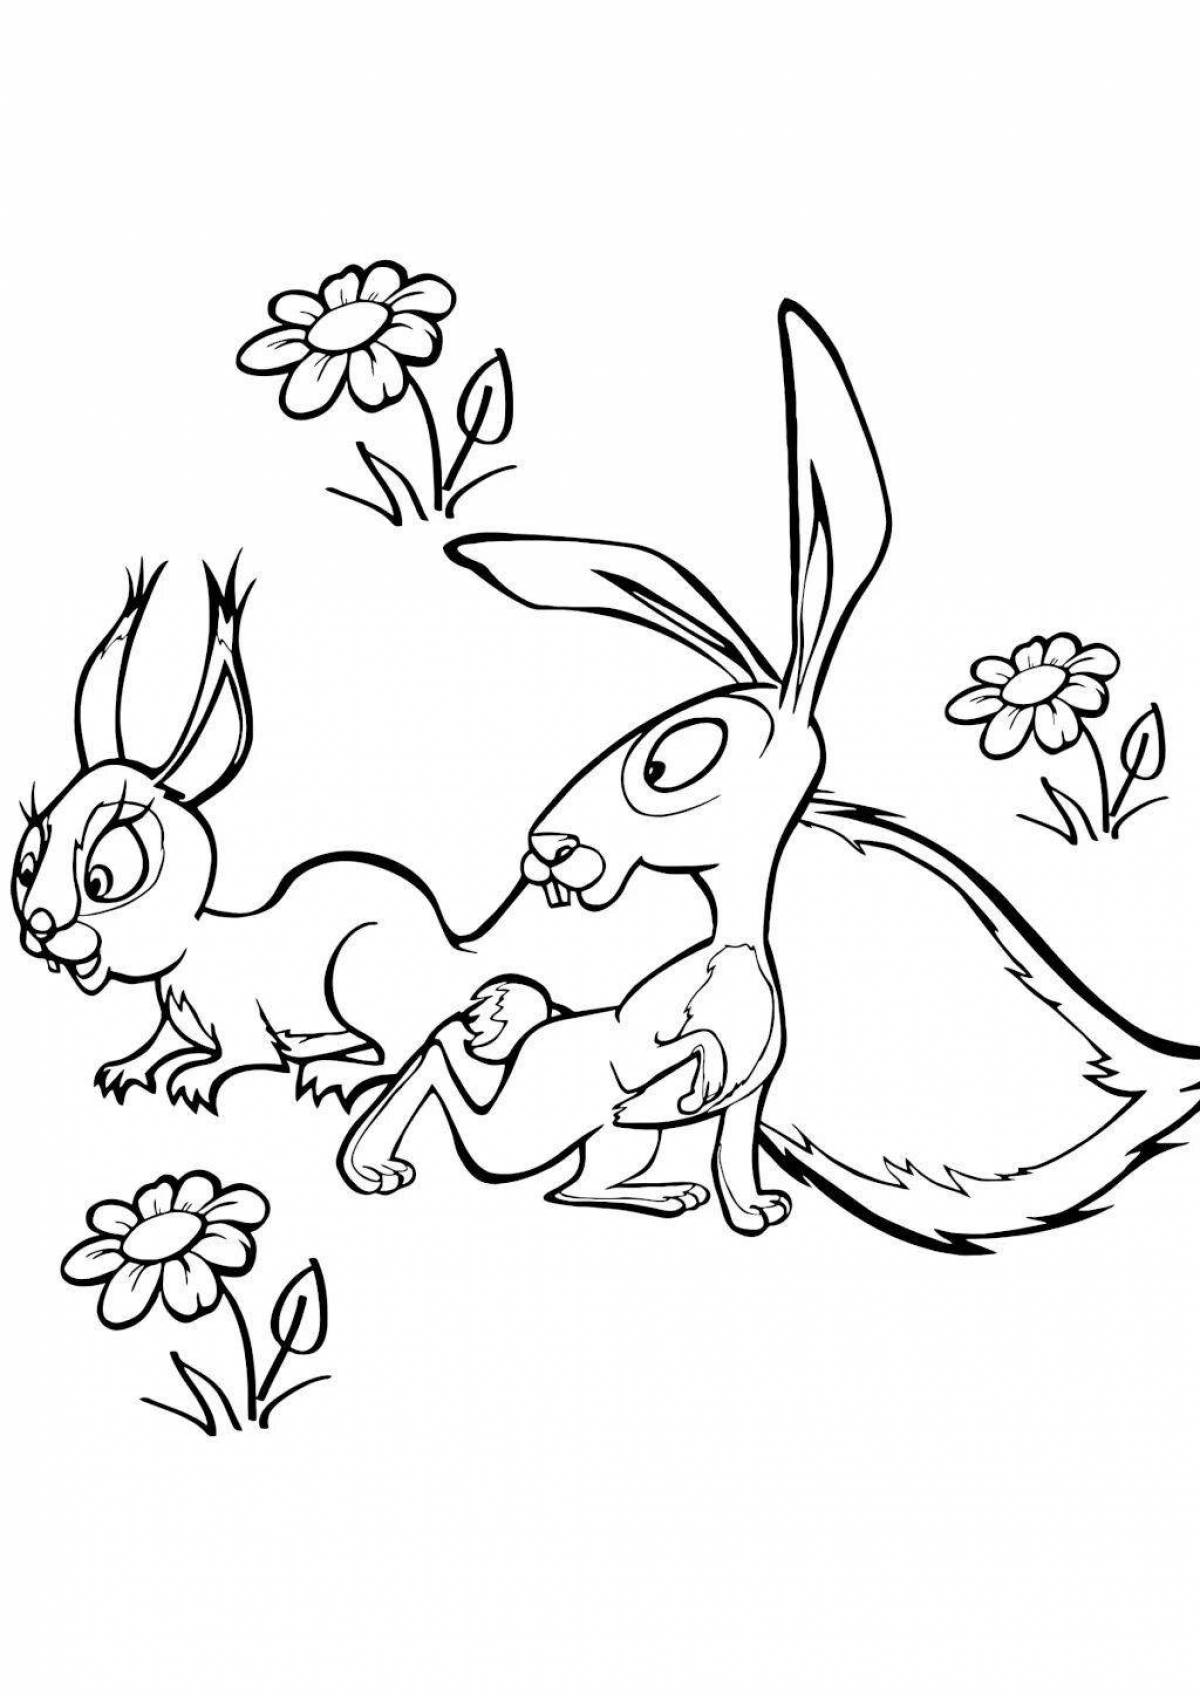 Attractive coloring of a hare from a masha and a bear